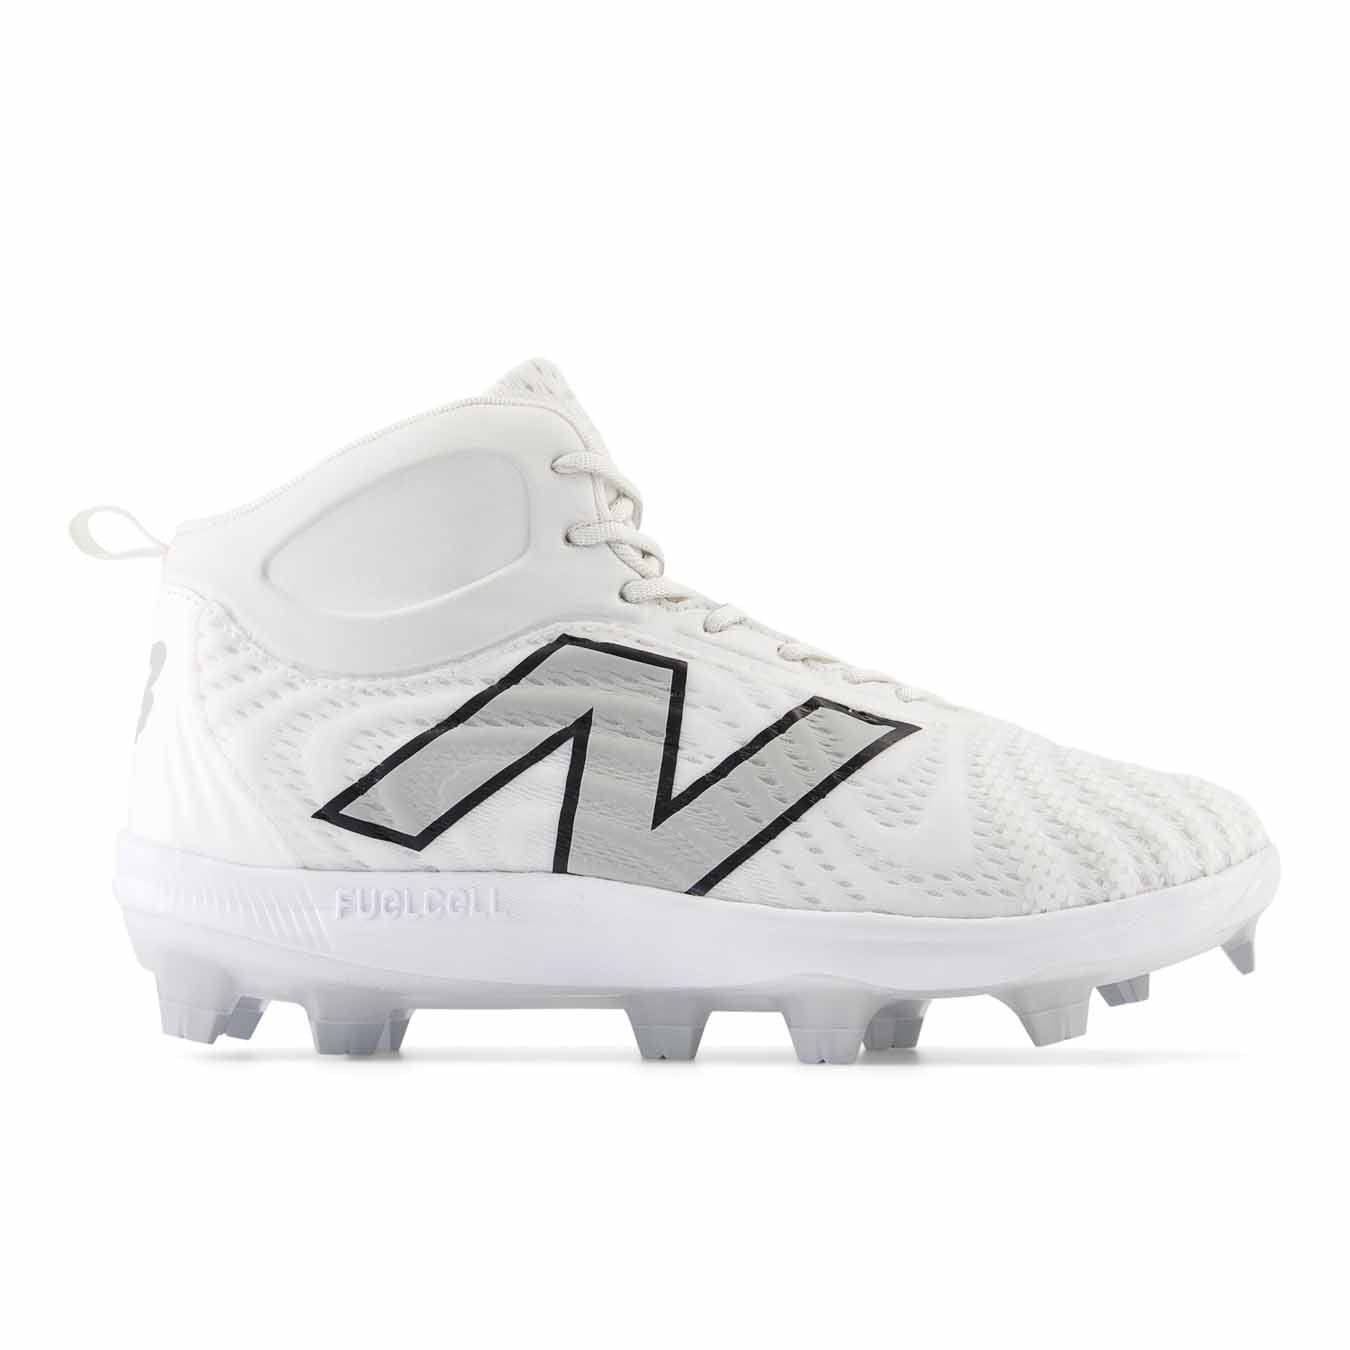 New Balance PM4040v7 Mid Molded Cleat